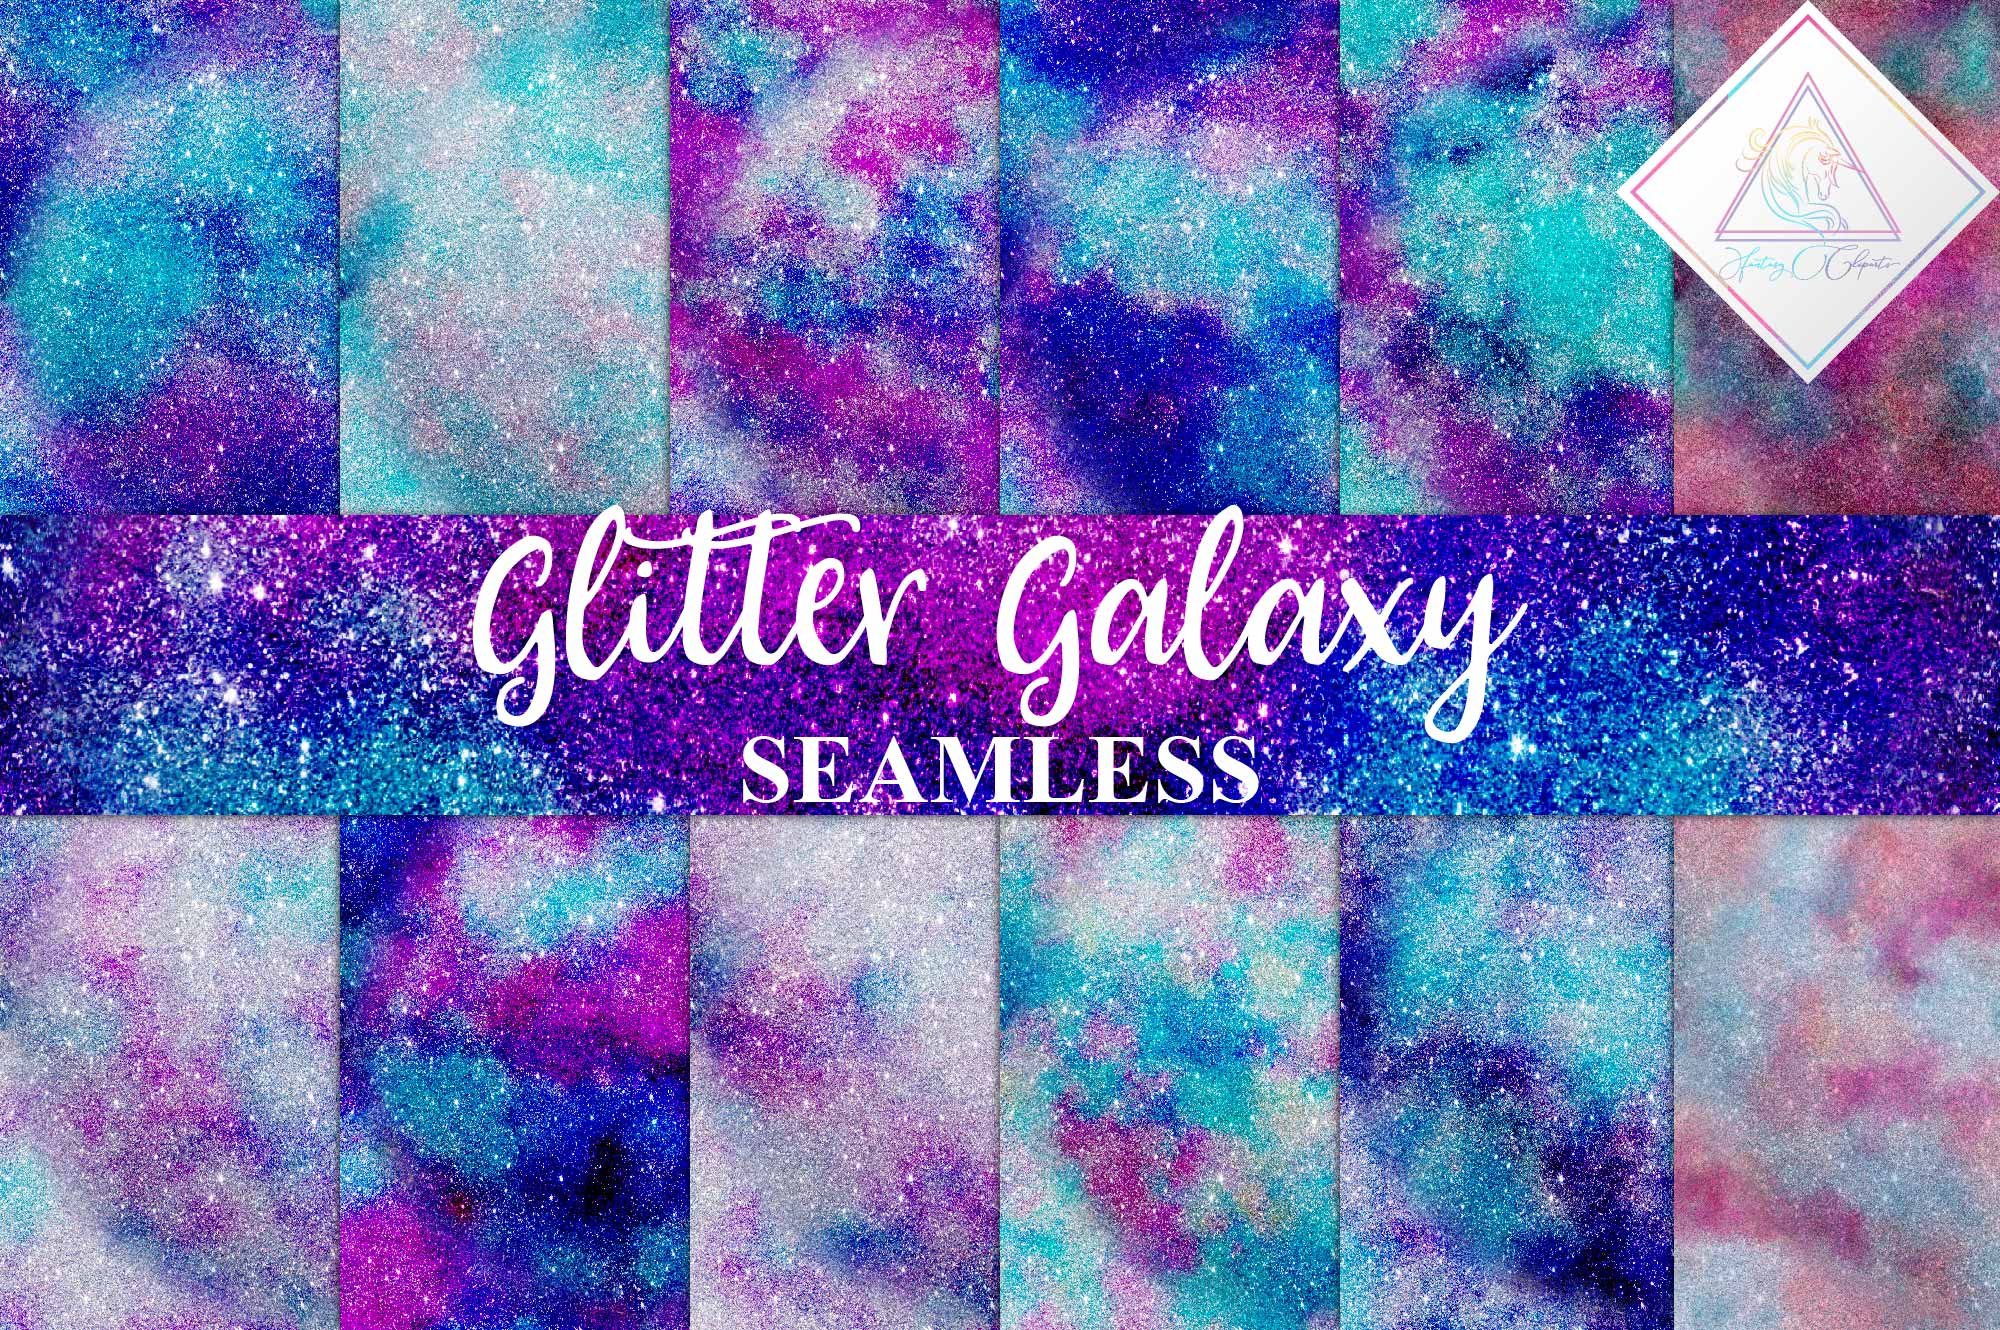 Seamless Glitter Galaxy Textures cover image.